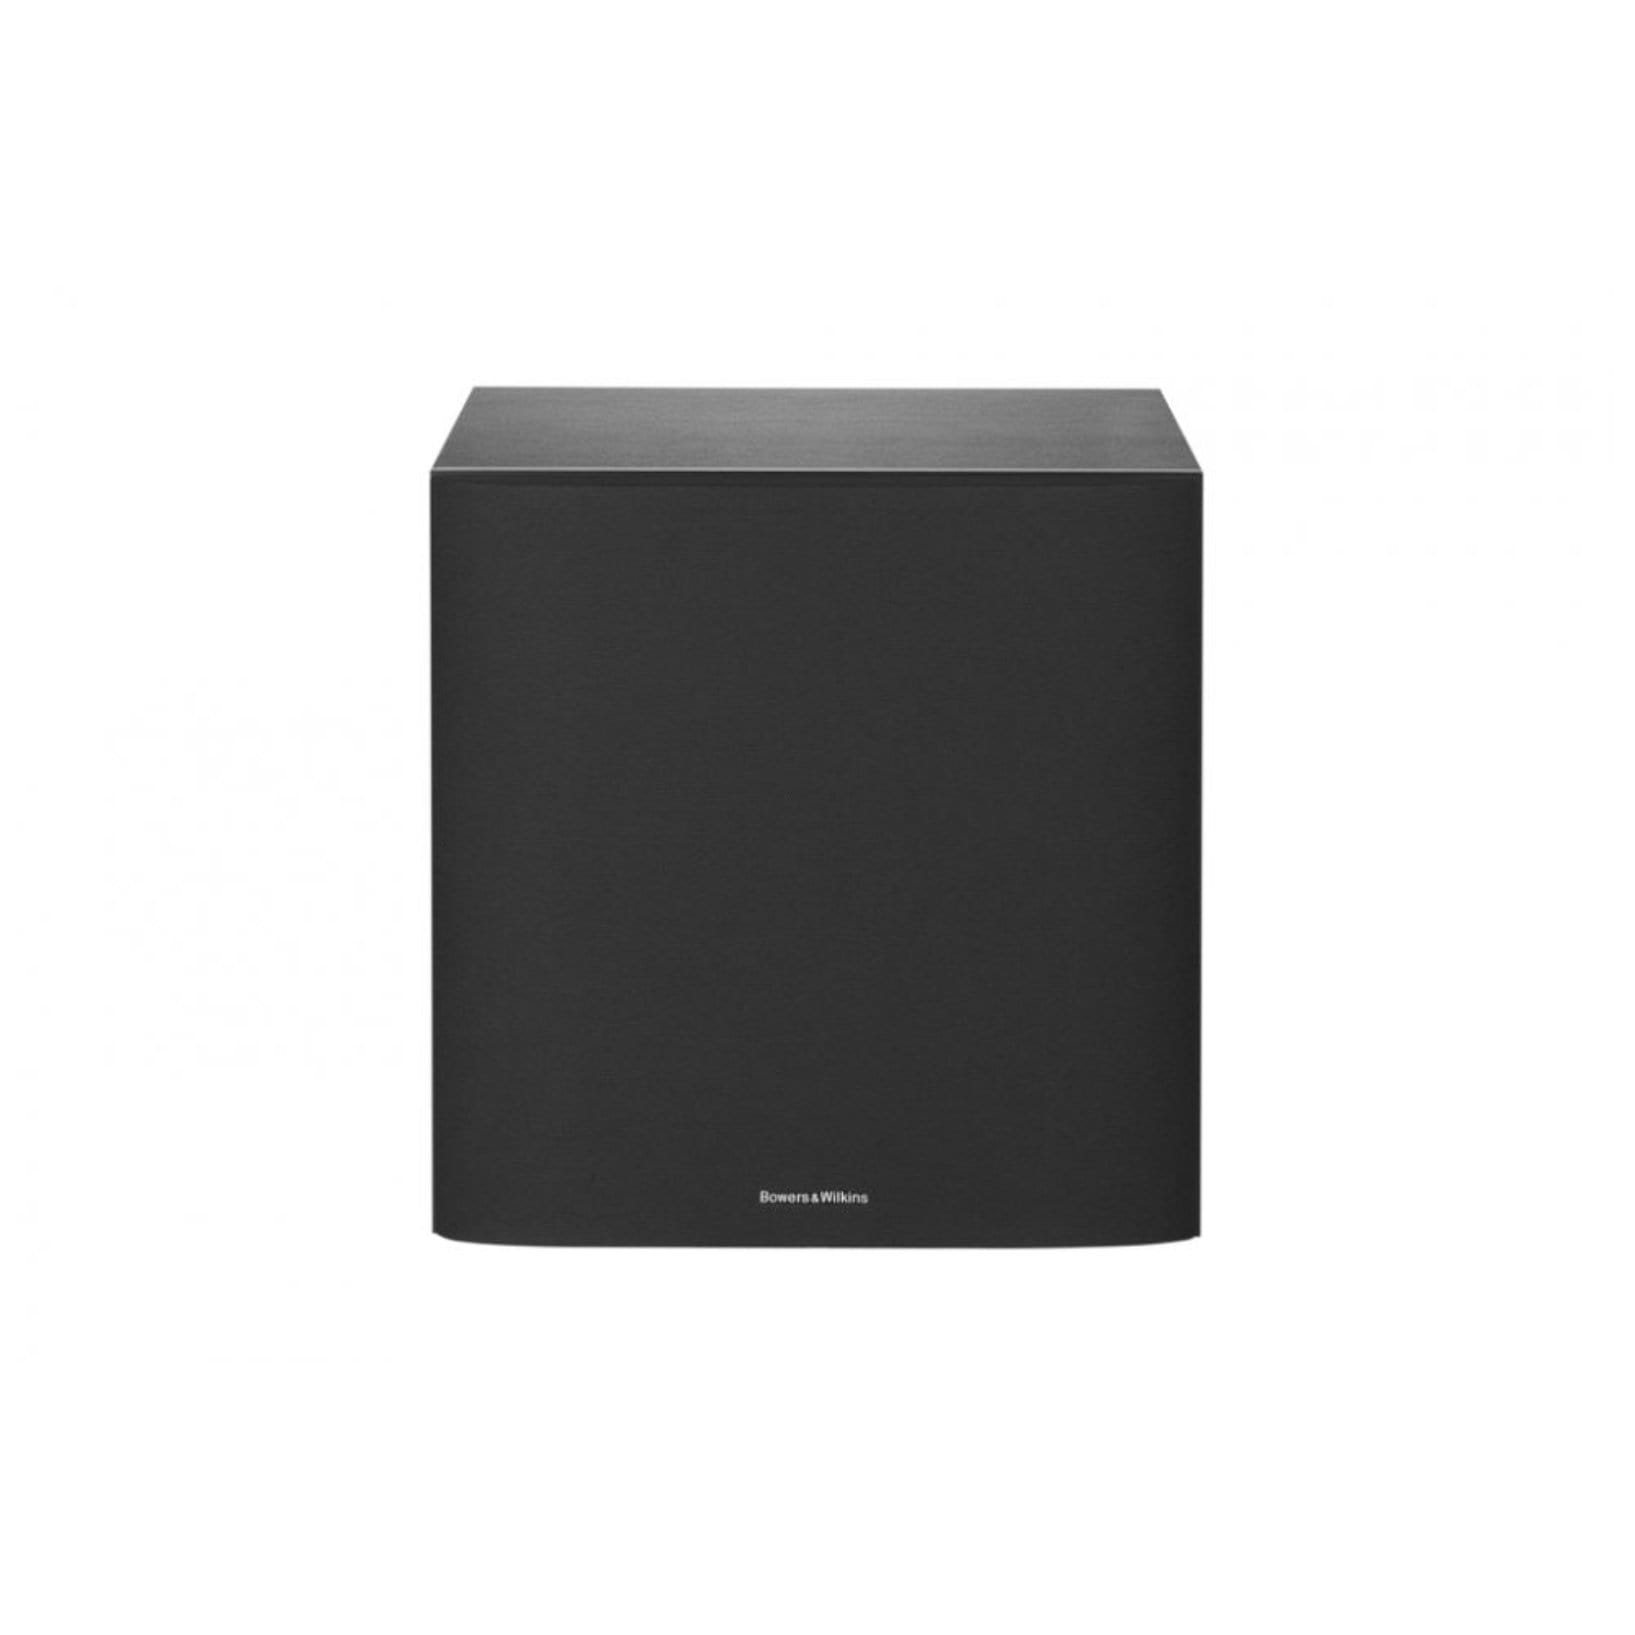 Bowers and Wilkins MT-55 5.1 Mini Home Theatre Speaker Package